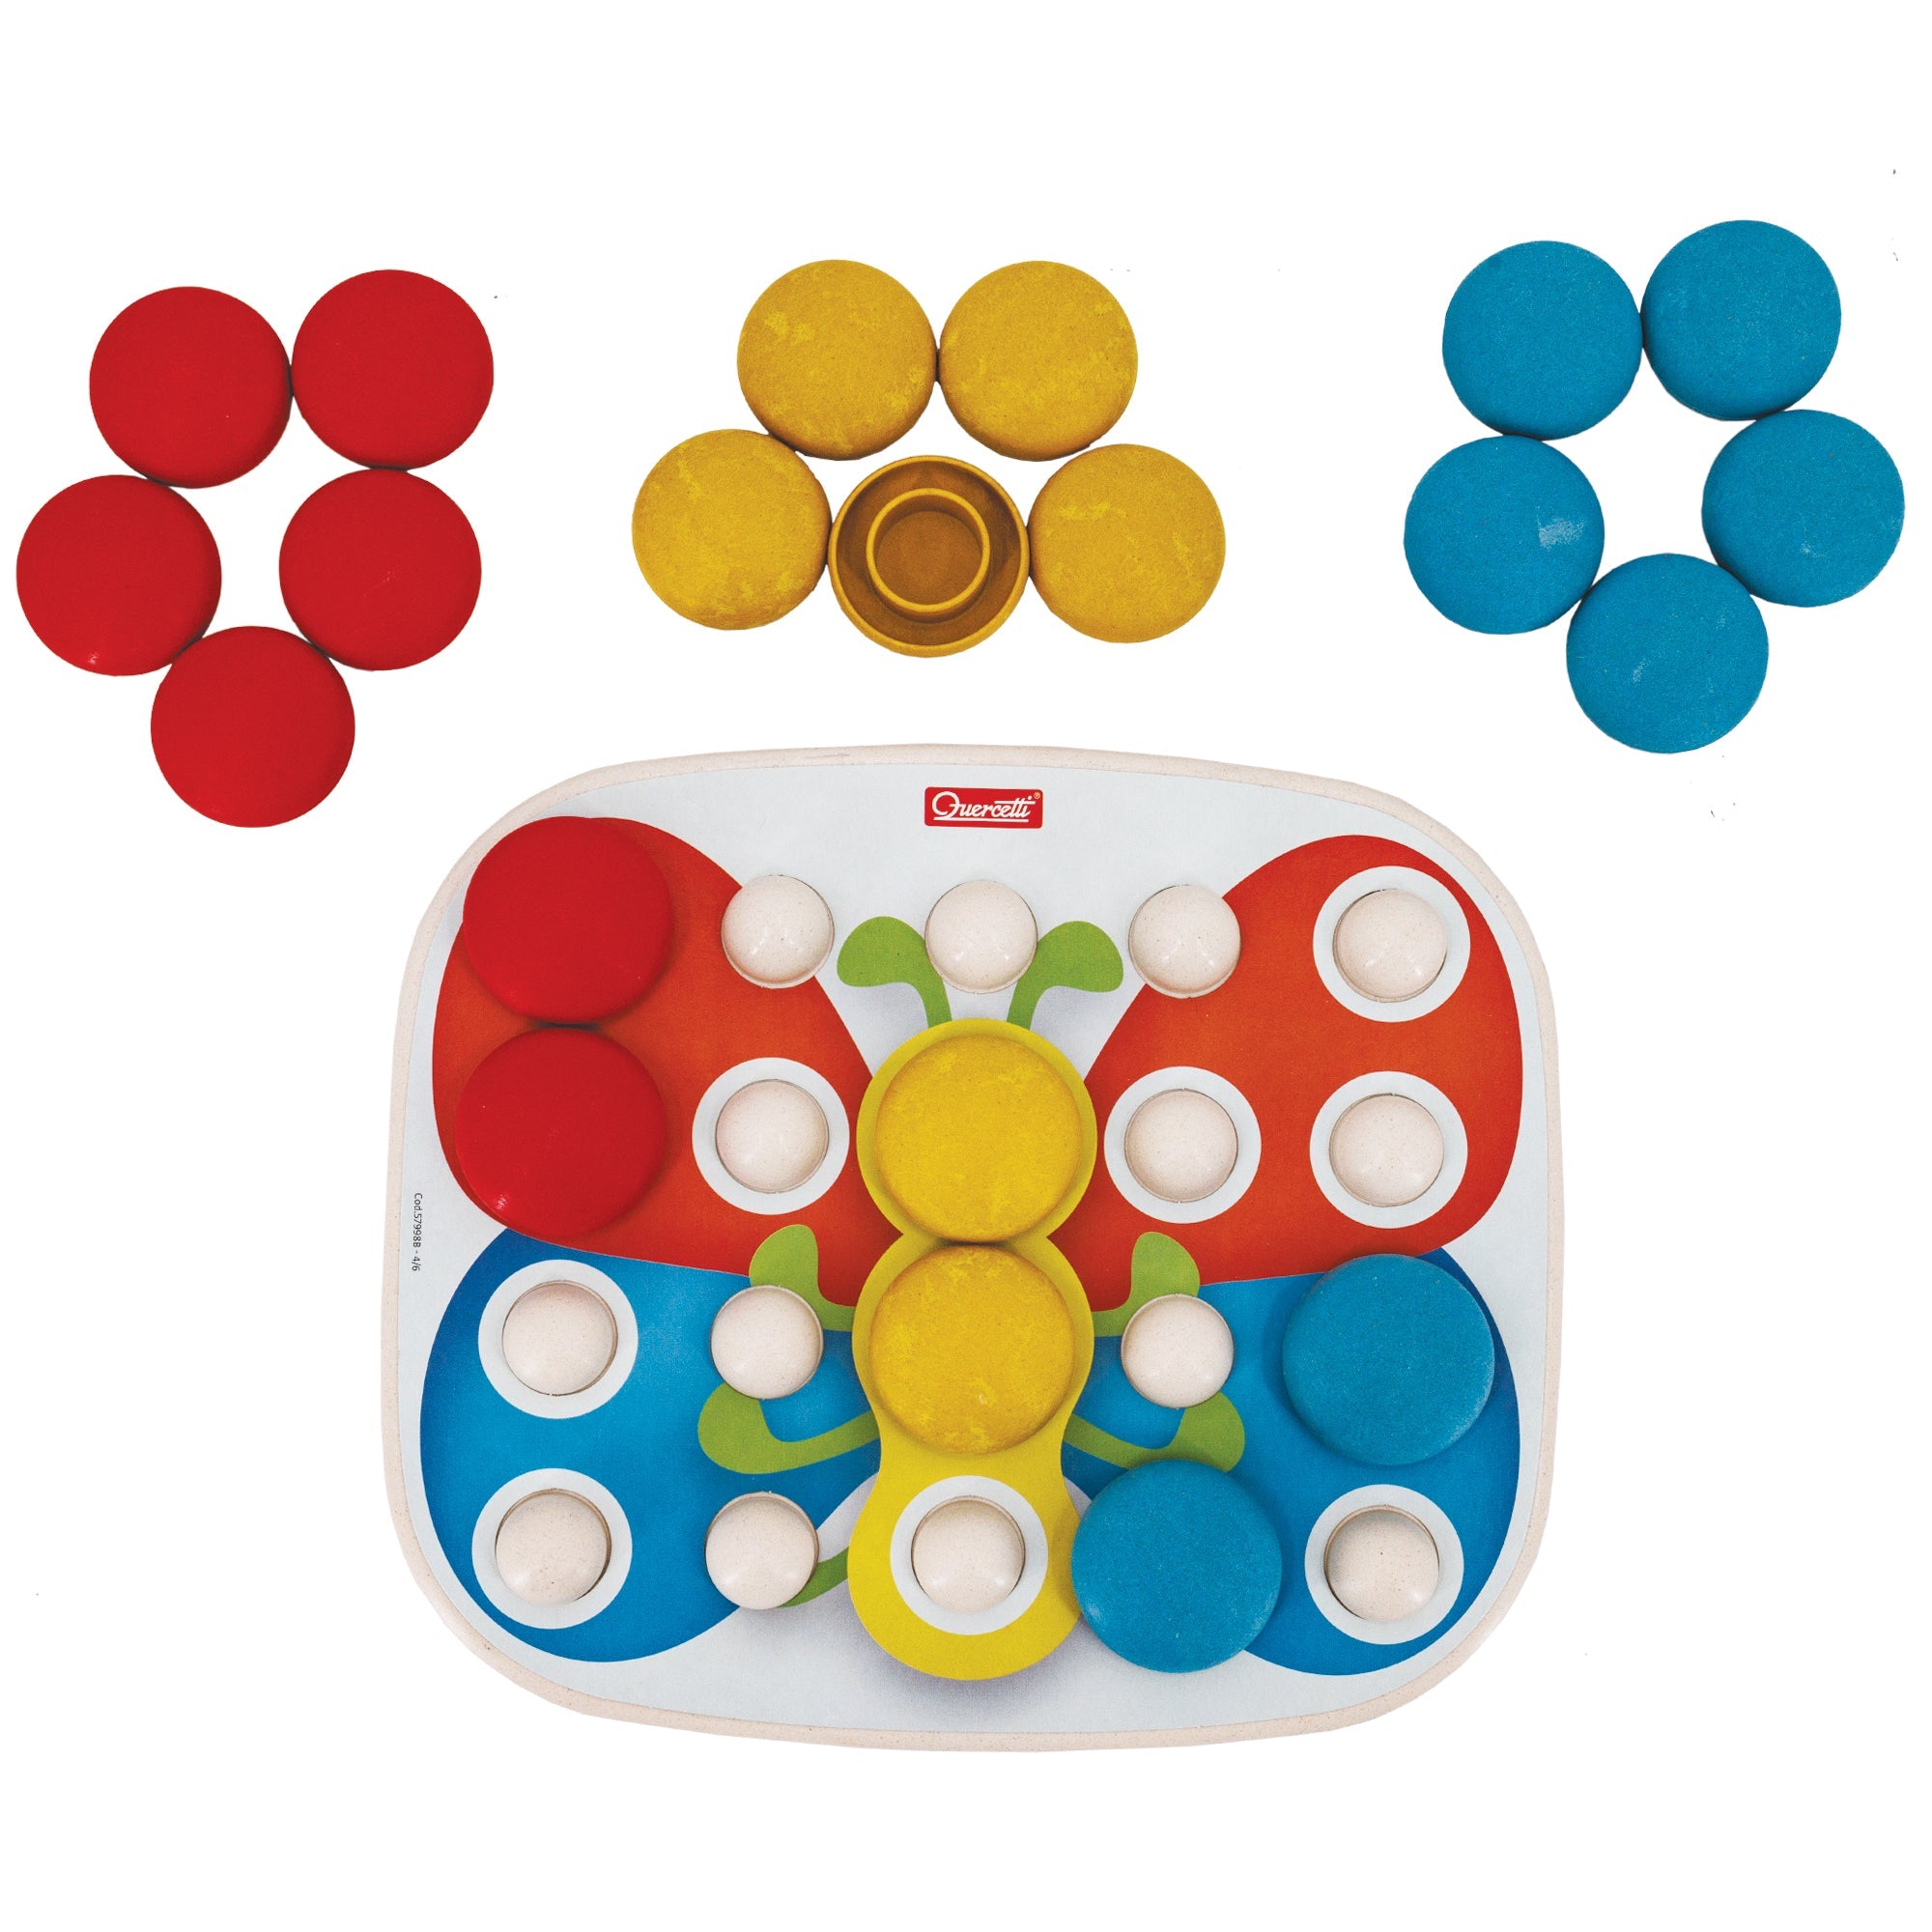 Quercetti Fanta Color Baby set. At the top are 3 sets of rounded pieces that fit over the peg board below. There is 5 red on the left, 5 yellow in the center, and 5 blue on the right. On the peg board below is a butterfly pictures, with several colored pieces placed on top.